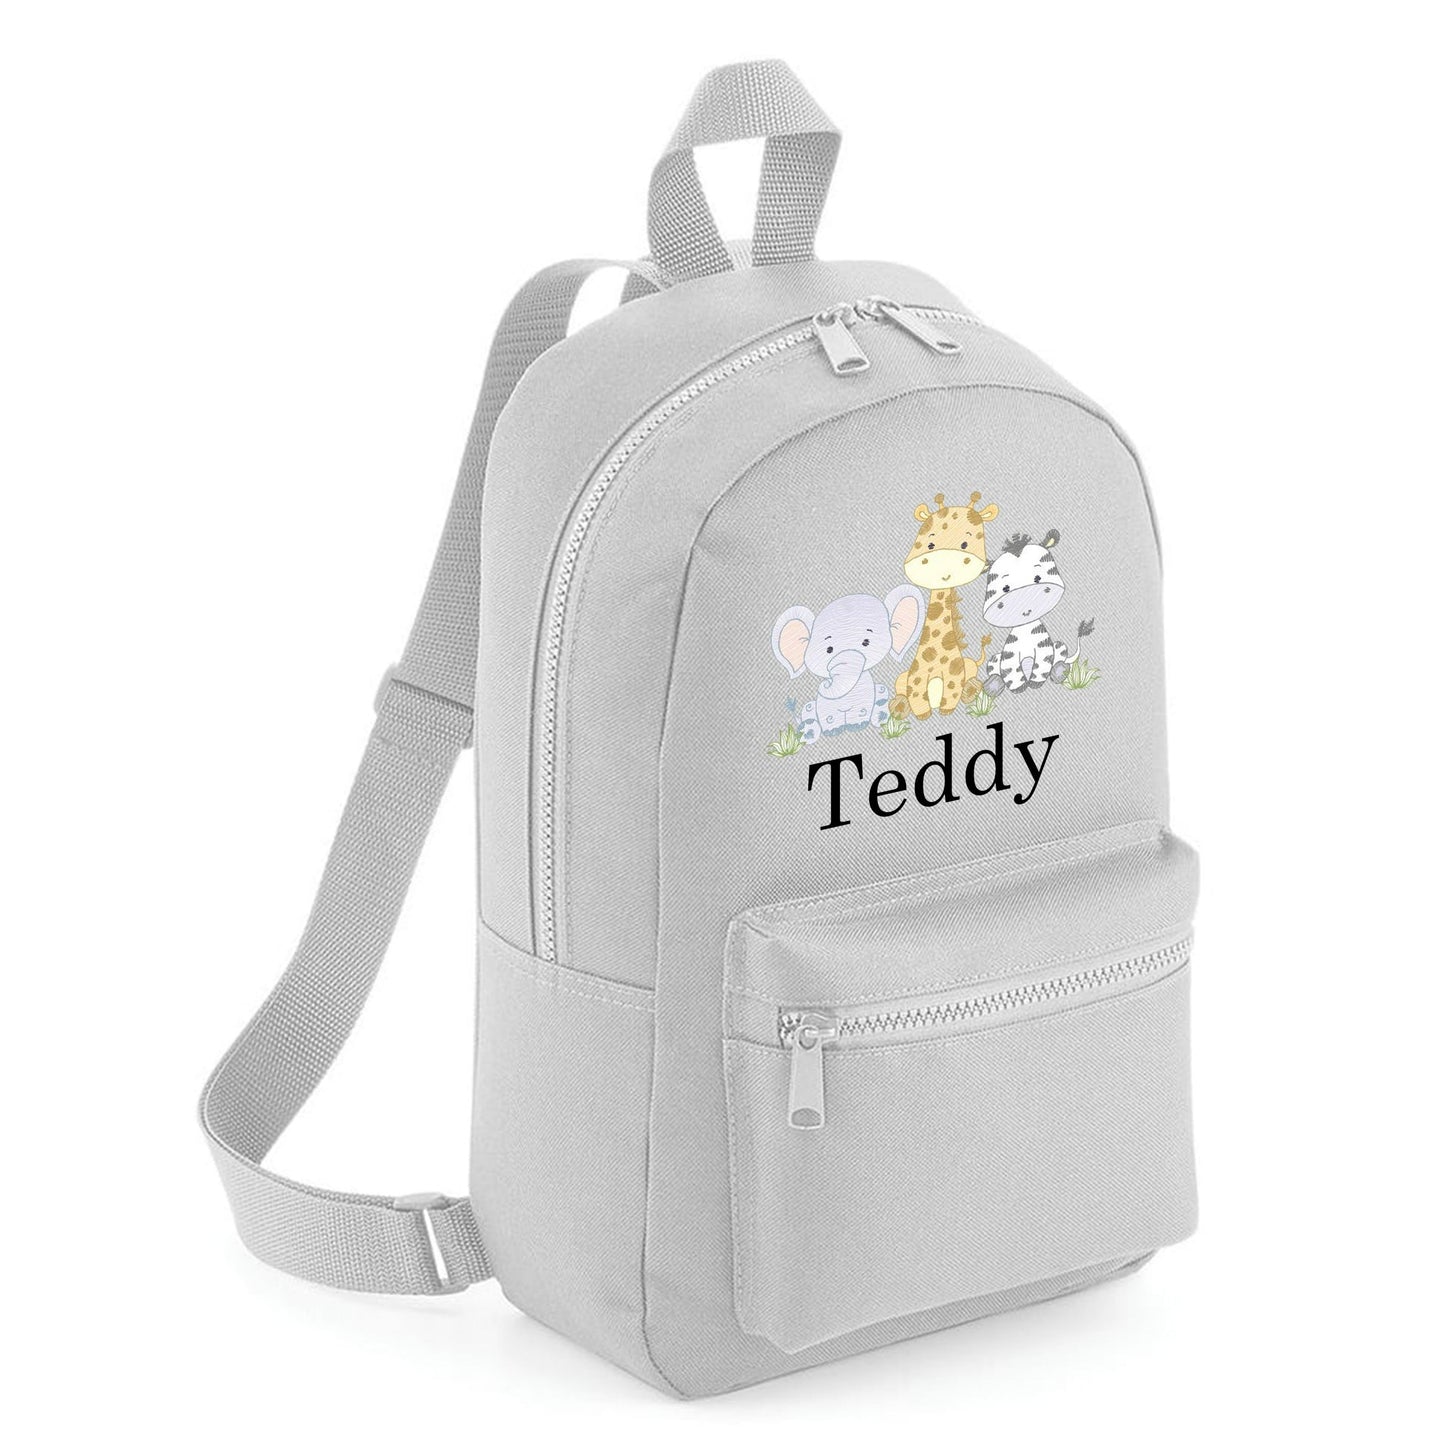 A safari animals embroidered personalsied custom name childrens backpack school bag